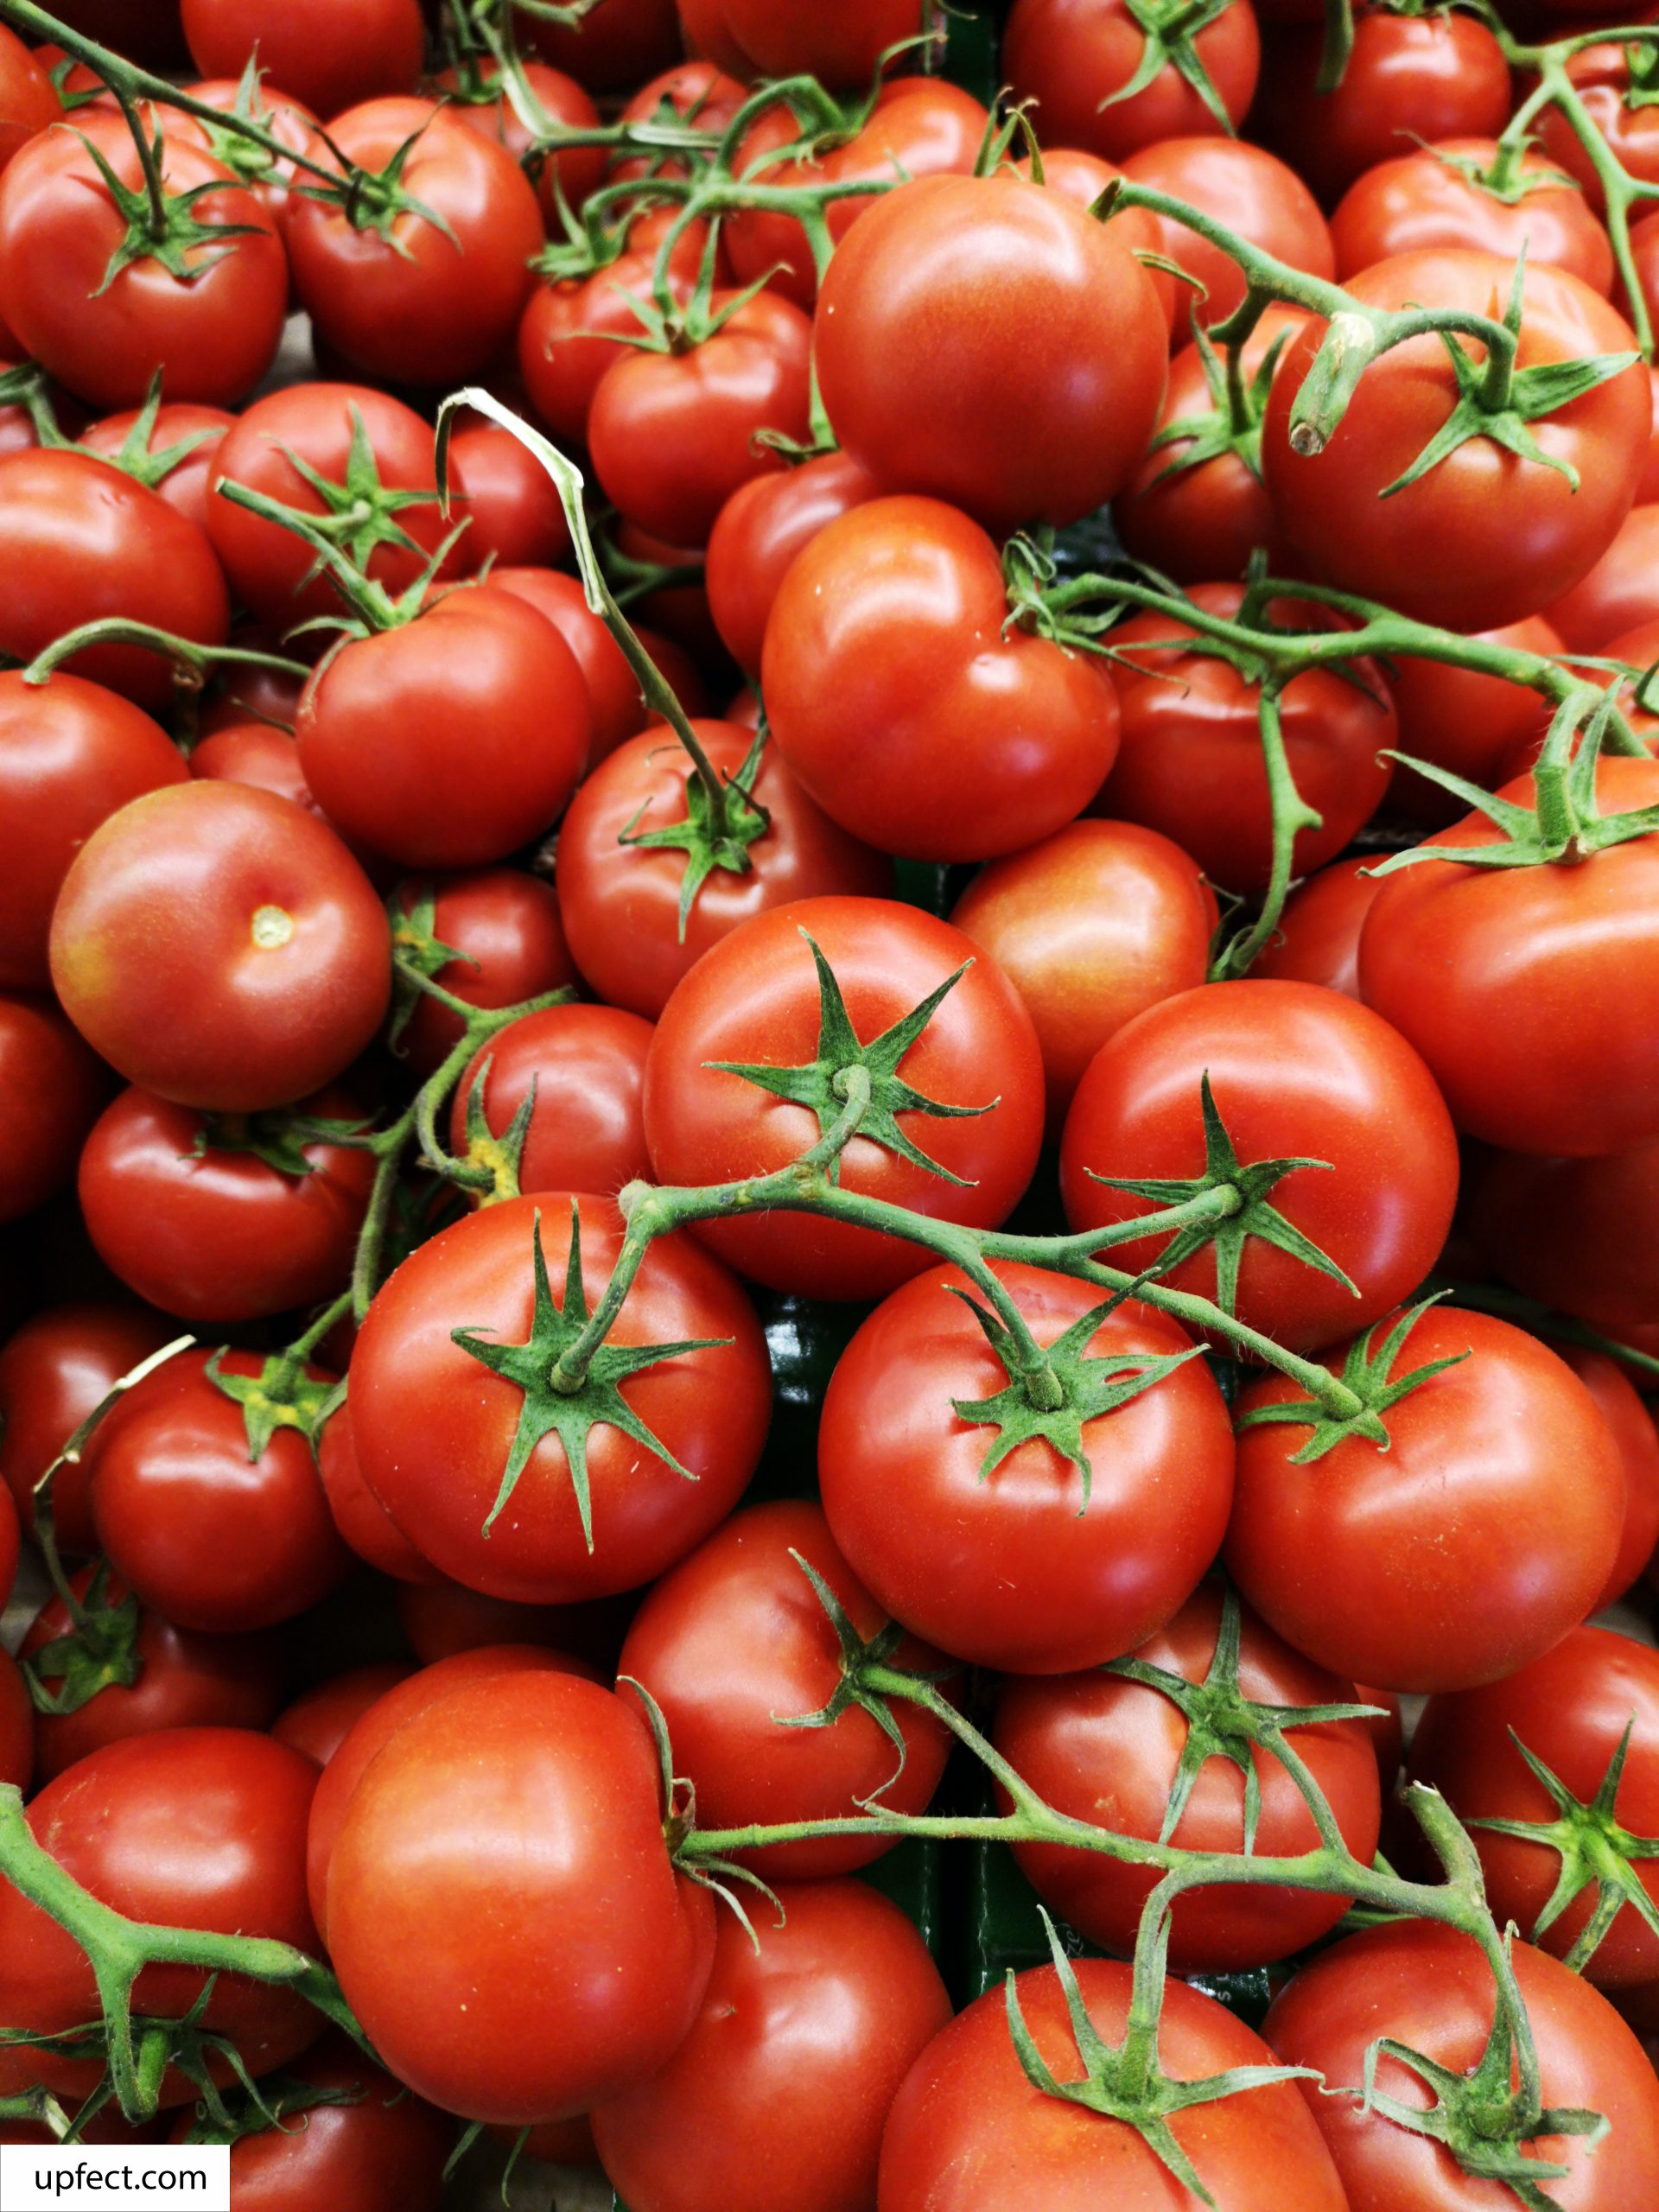 Tomatoes is the Best Food for Sperm Recovery